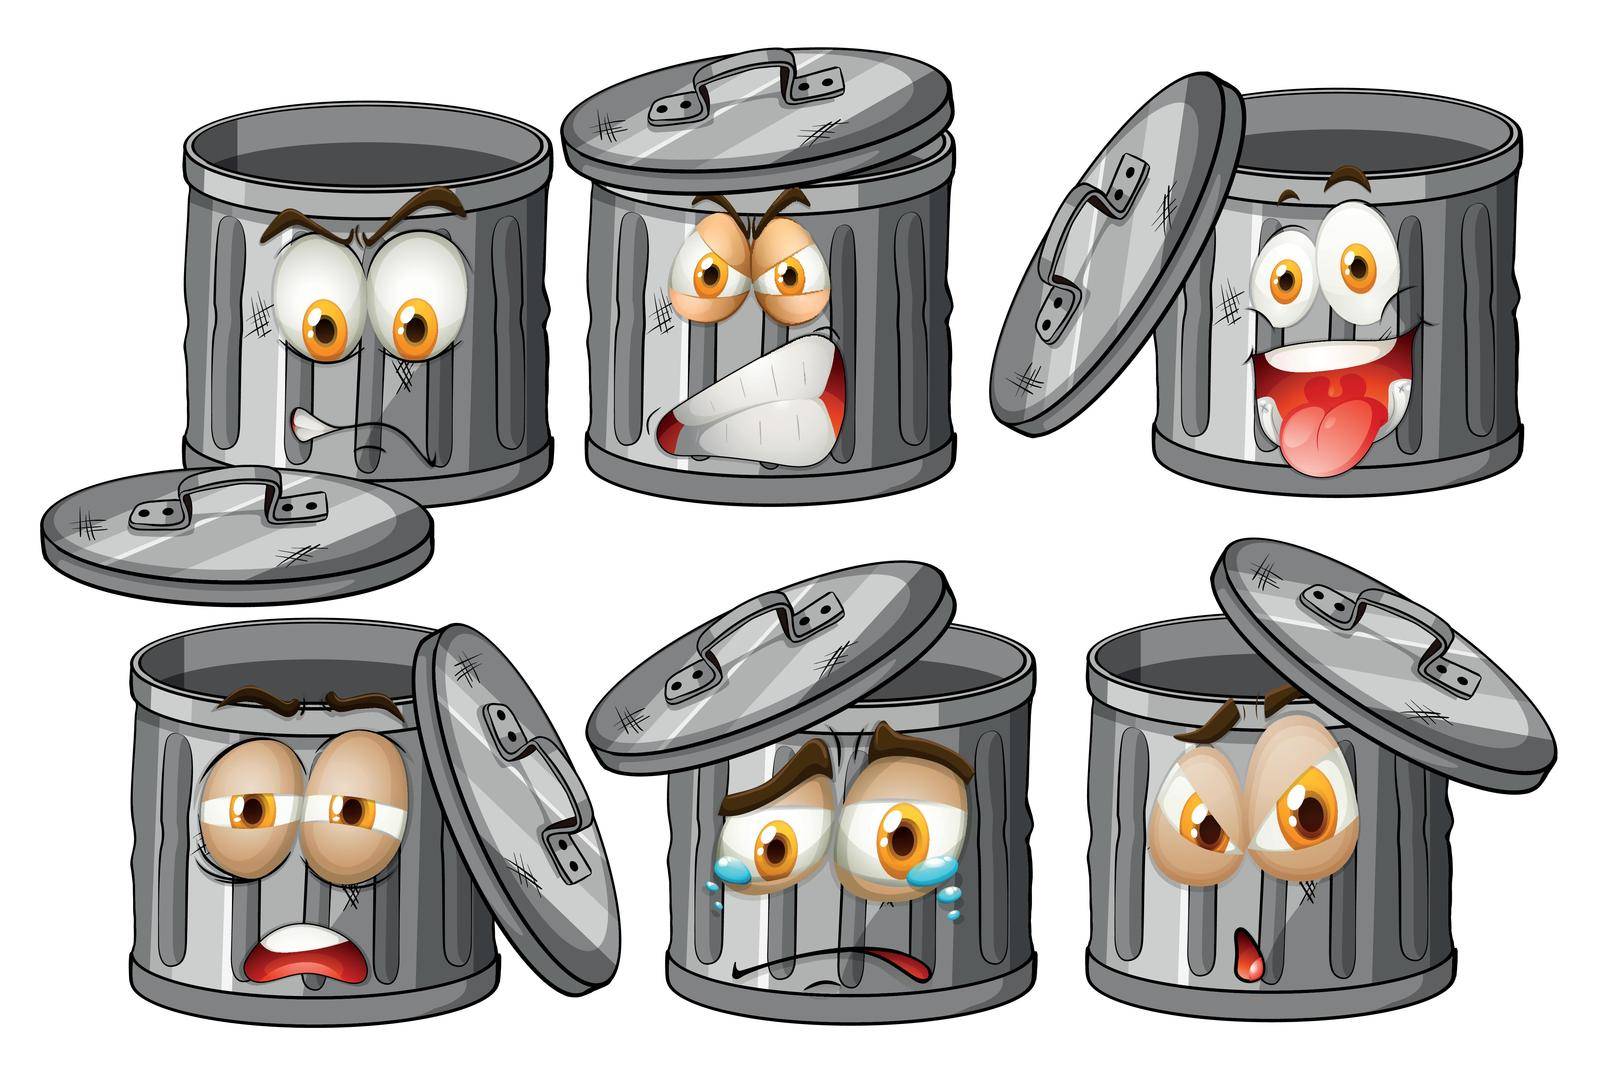 Trashcan with facial expressions by iimages